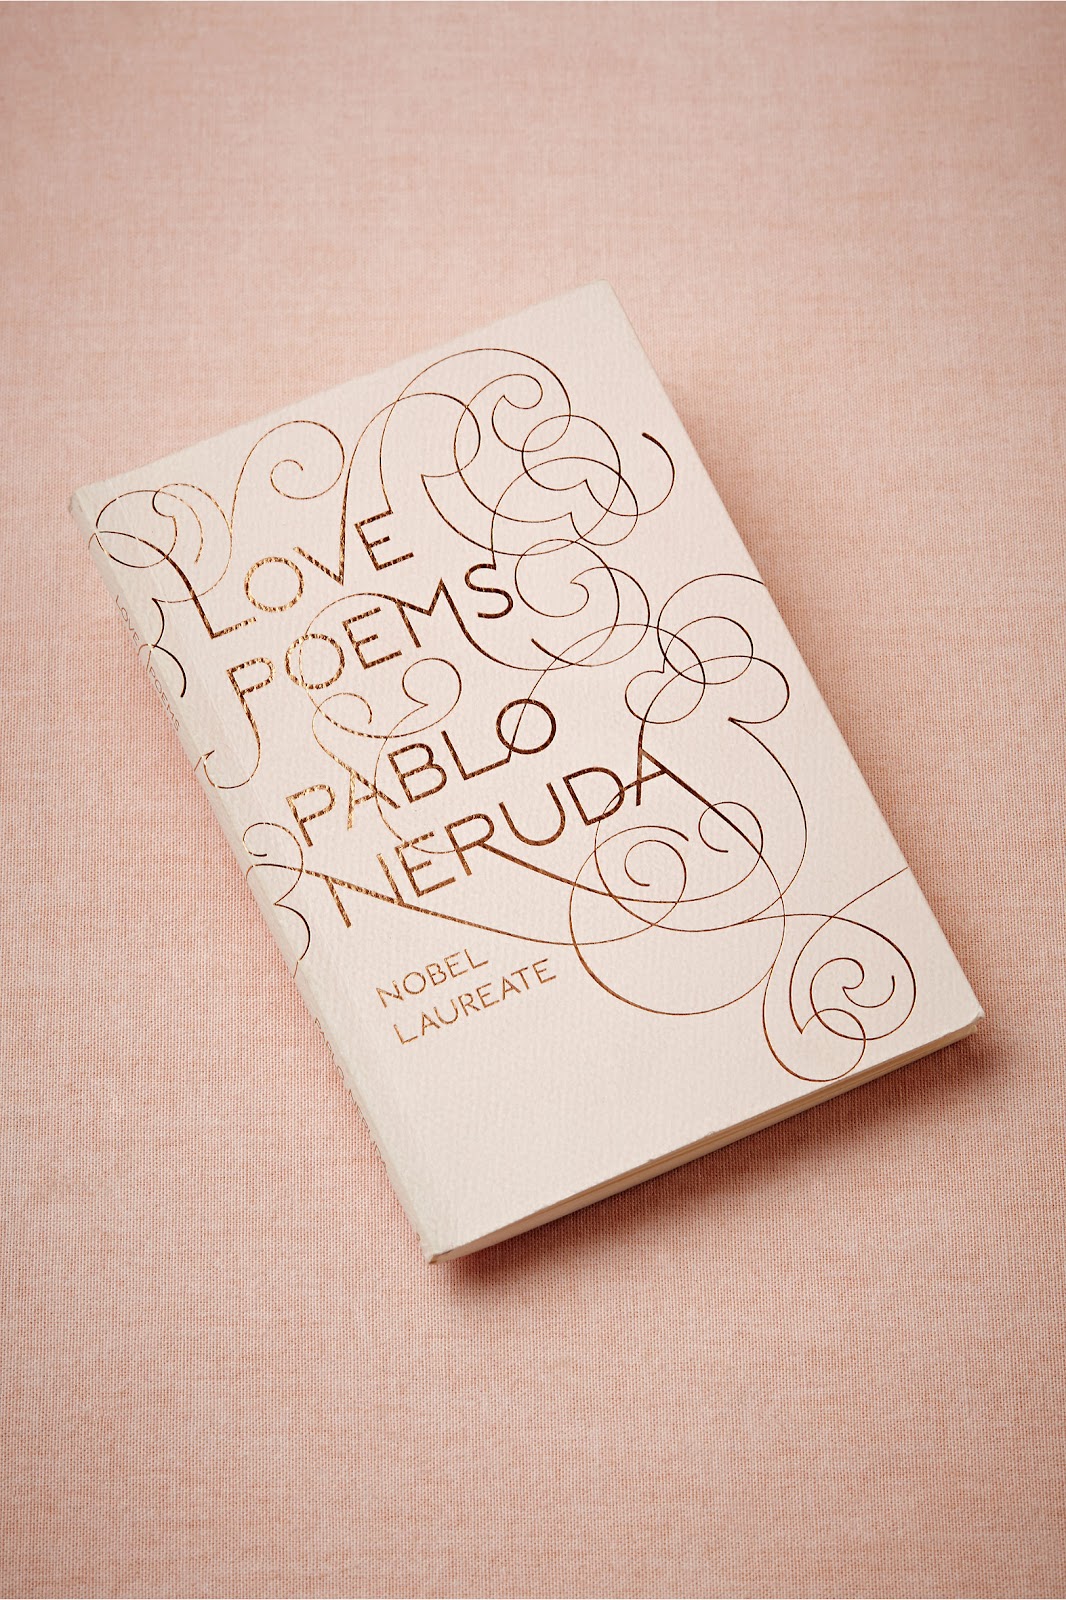 Book of love poems